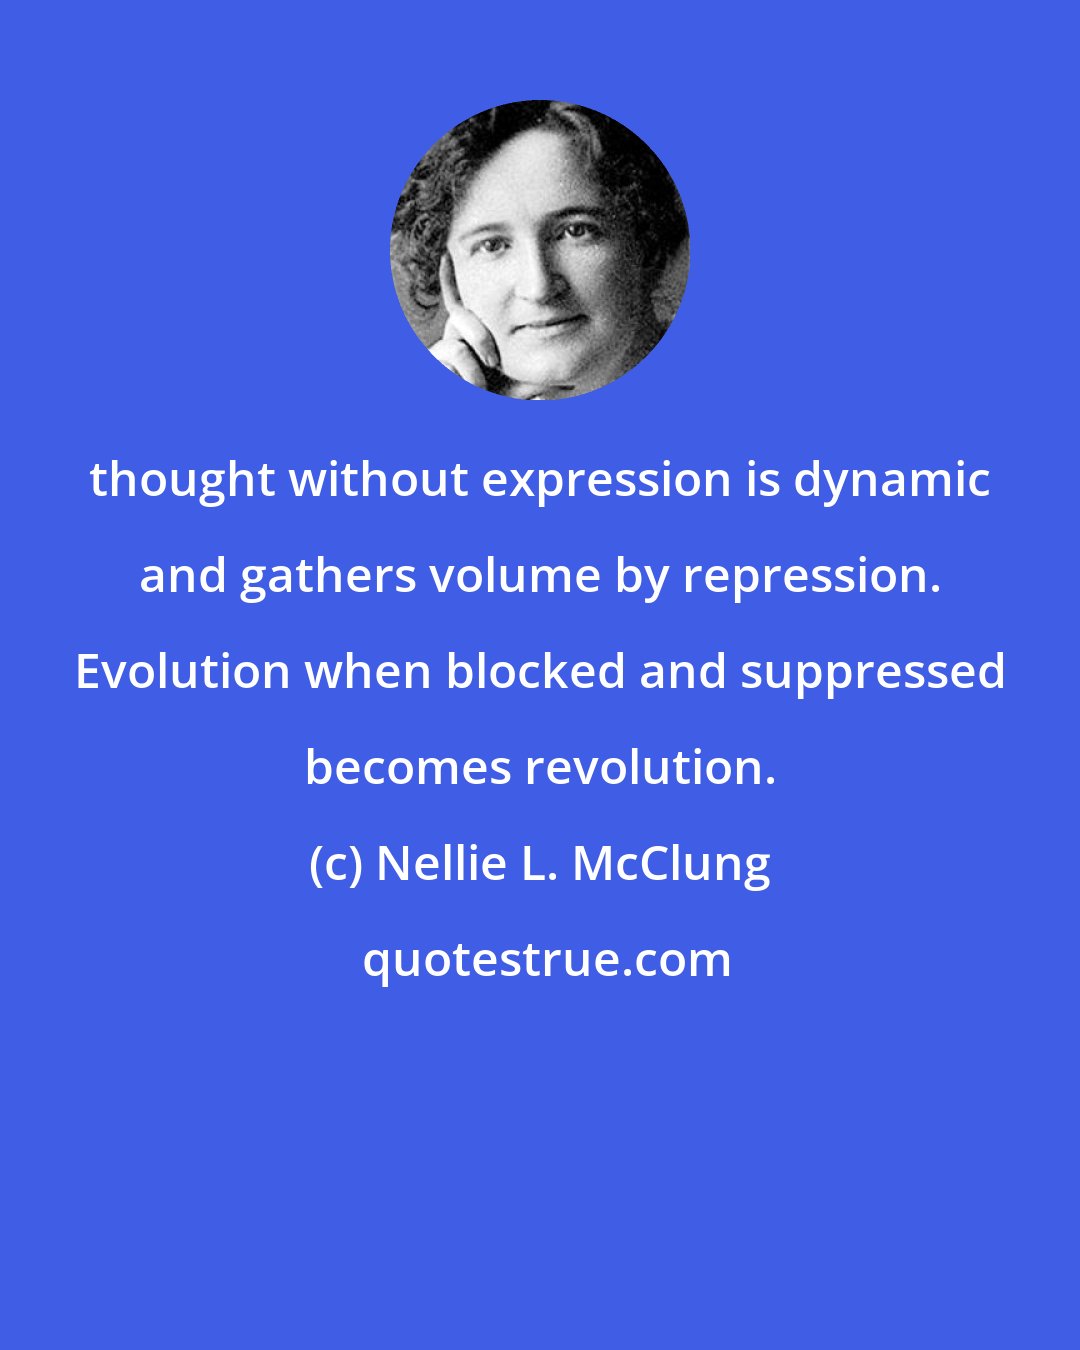 Nellie L. McClung: thought without expression is dynamic and gathers volume by repression. Evolution when blocked and suppressed becomes revolution.